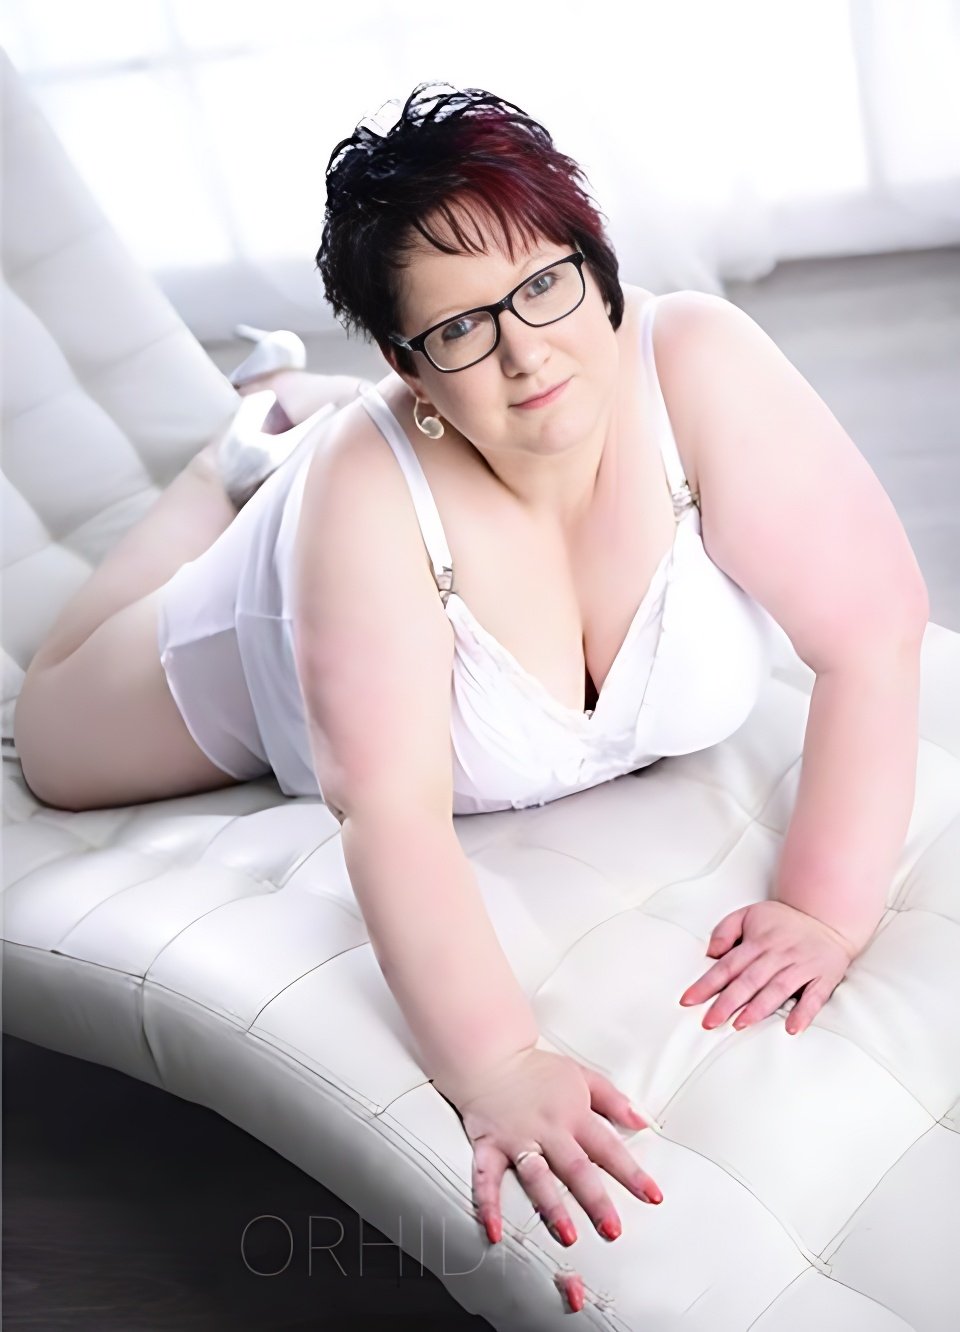 Meet Amazing Lilly (35) - Plus Size Modell: Top Escort Girl - model preview photo 0 